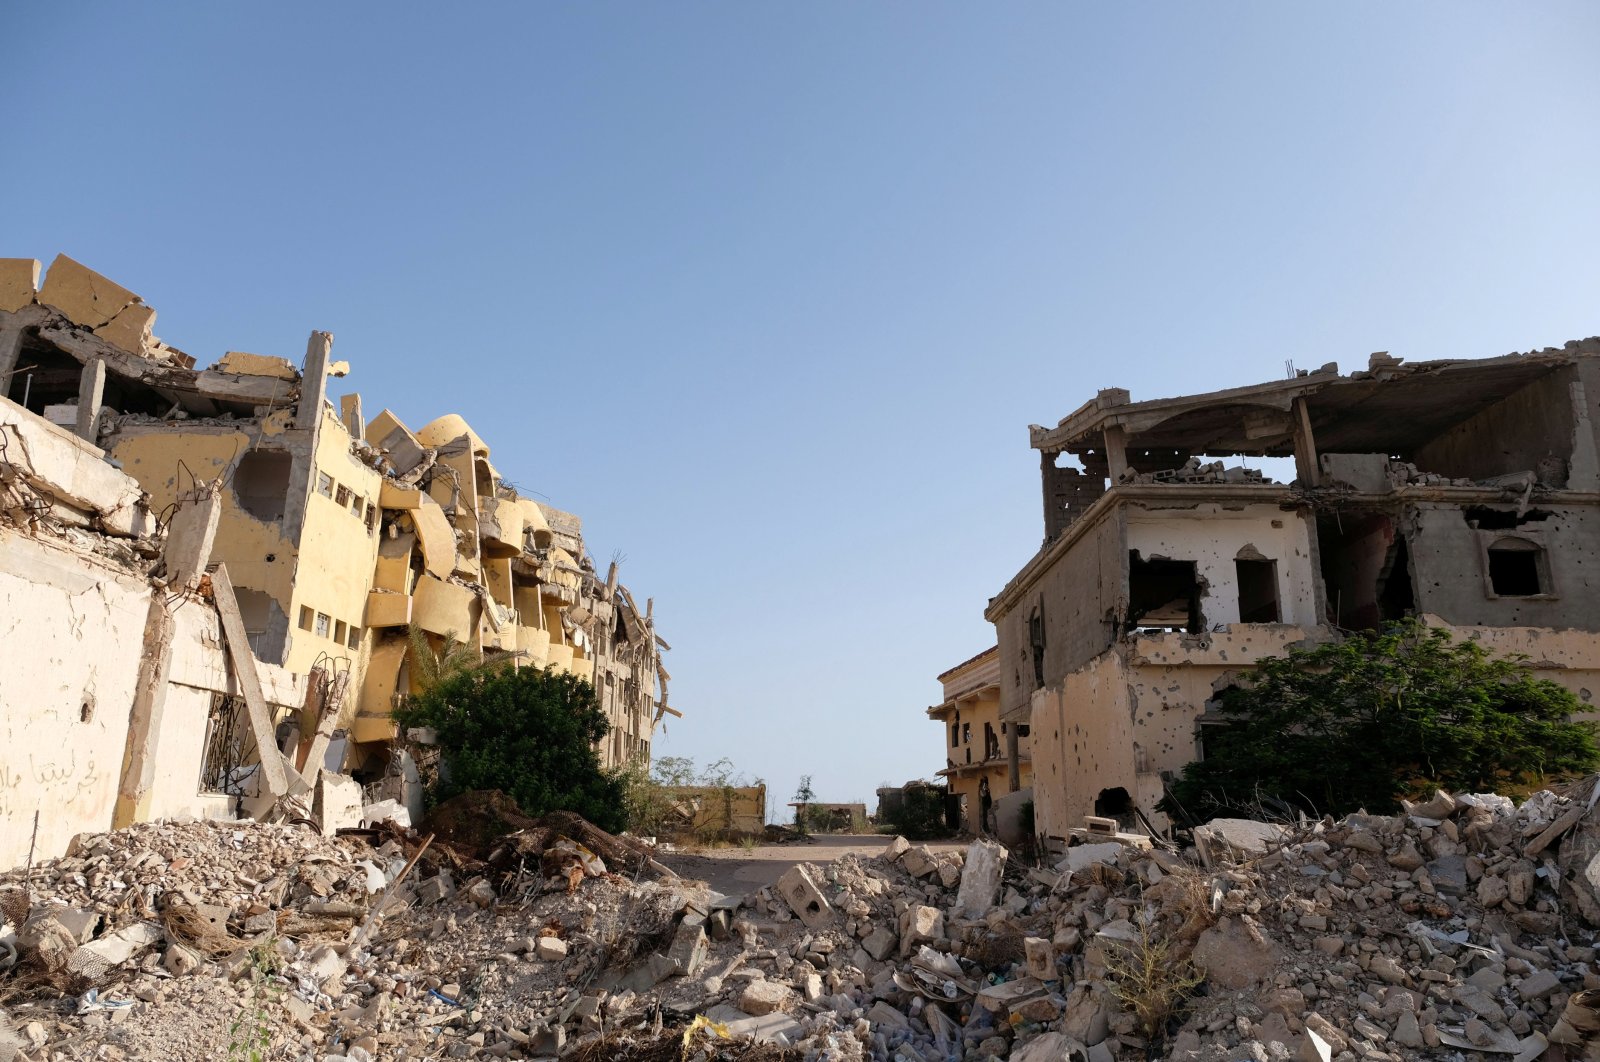 Buildings destroyed during past fighting with Daesh militants in Sirte, Libya, Aug. 18, 2020. (REUTERS Photo)